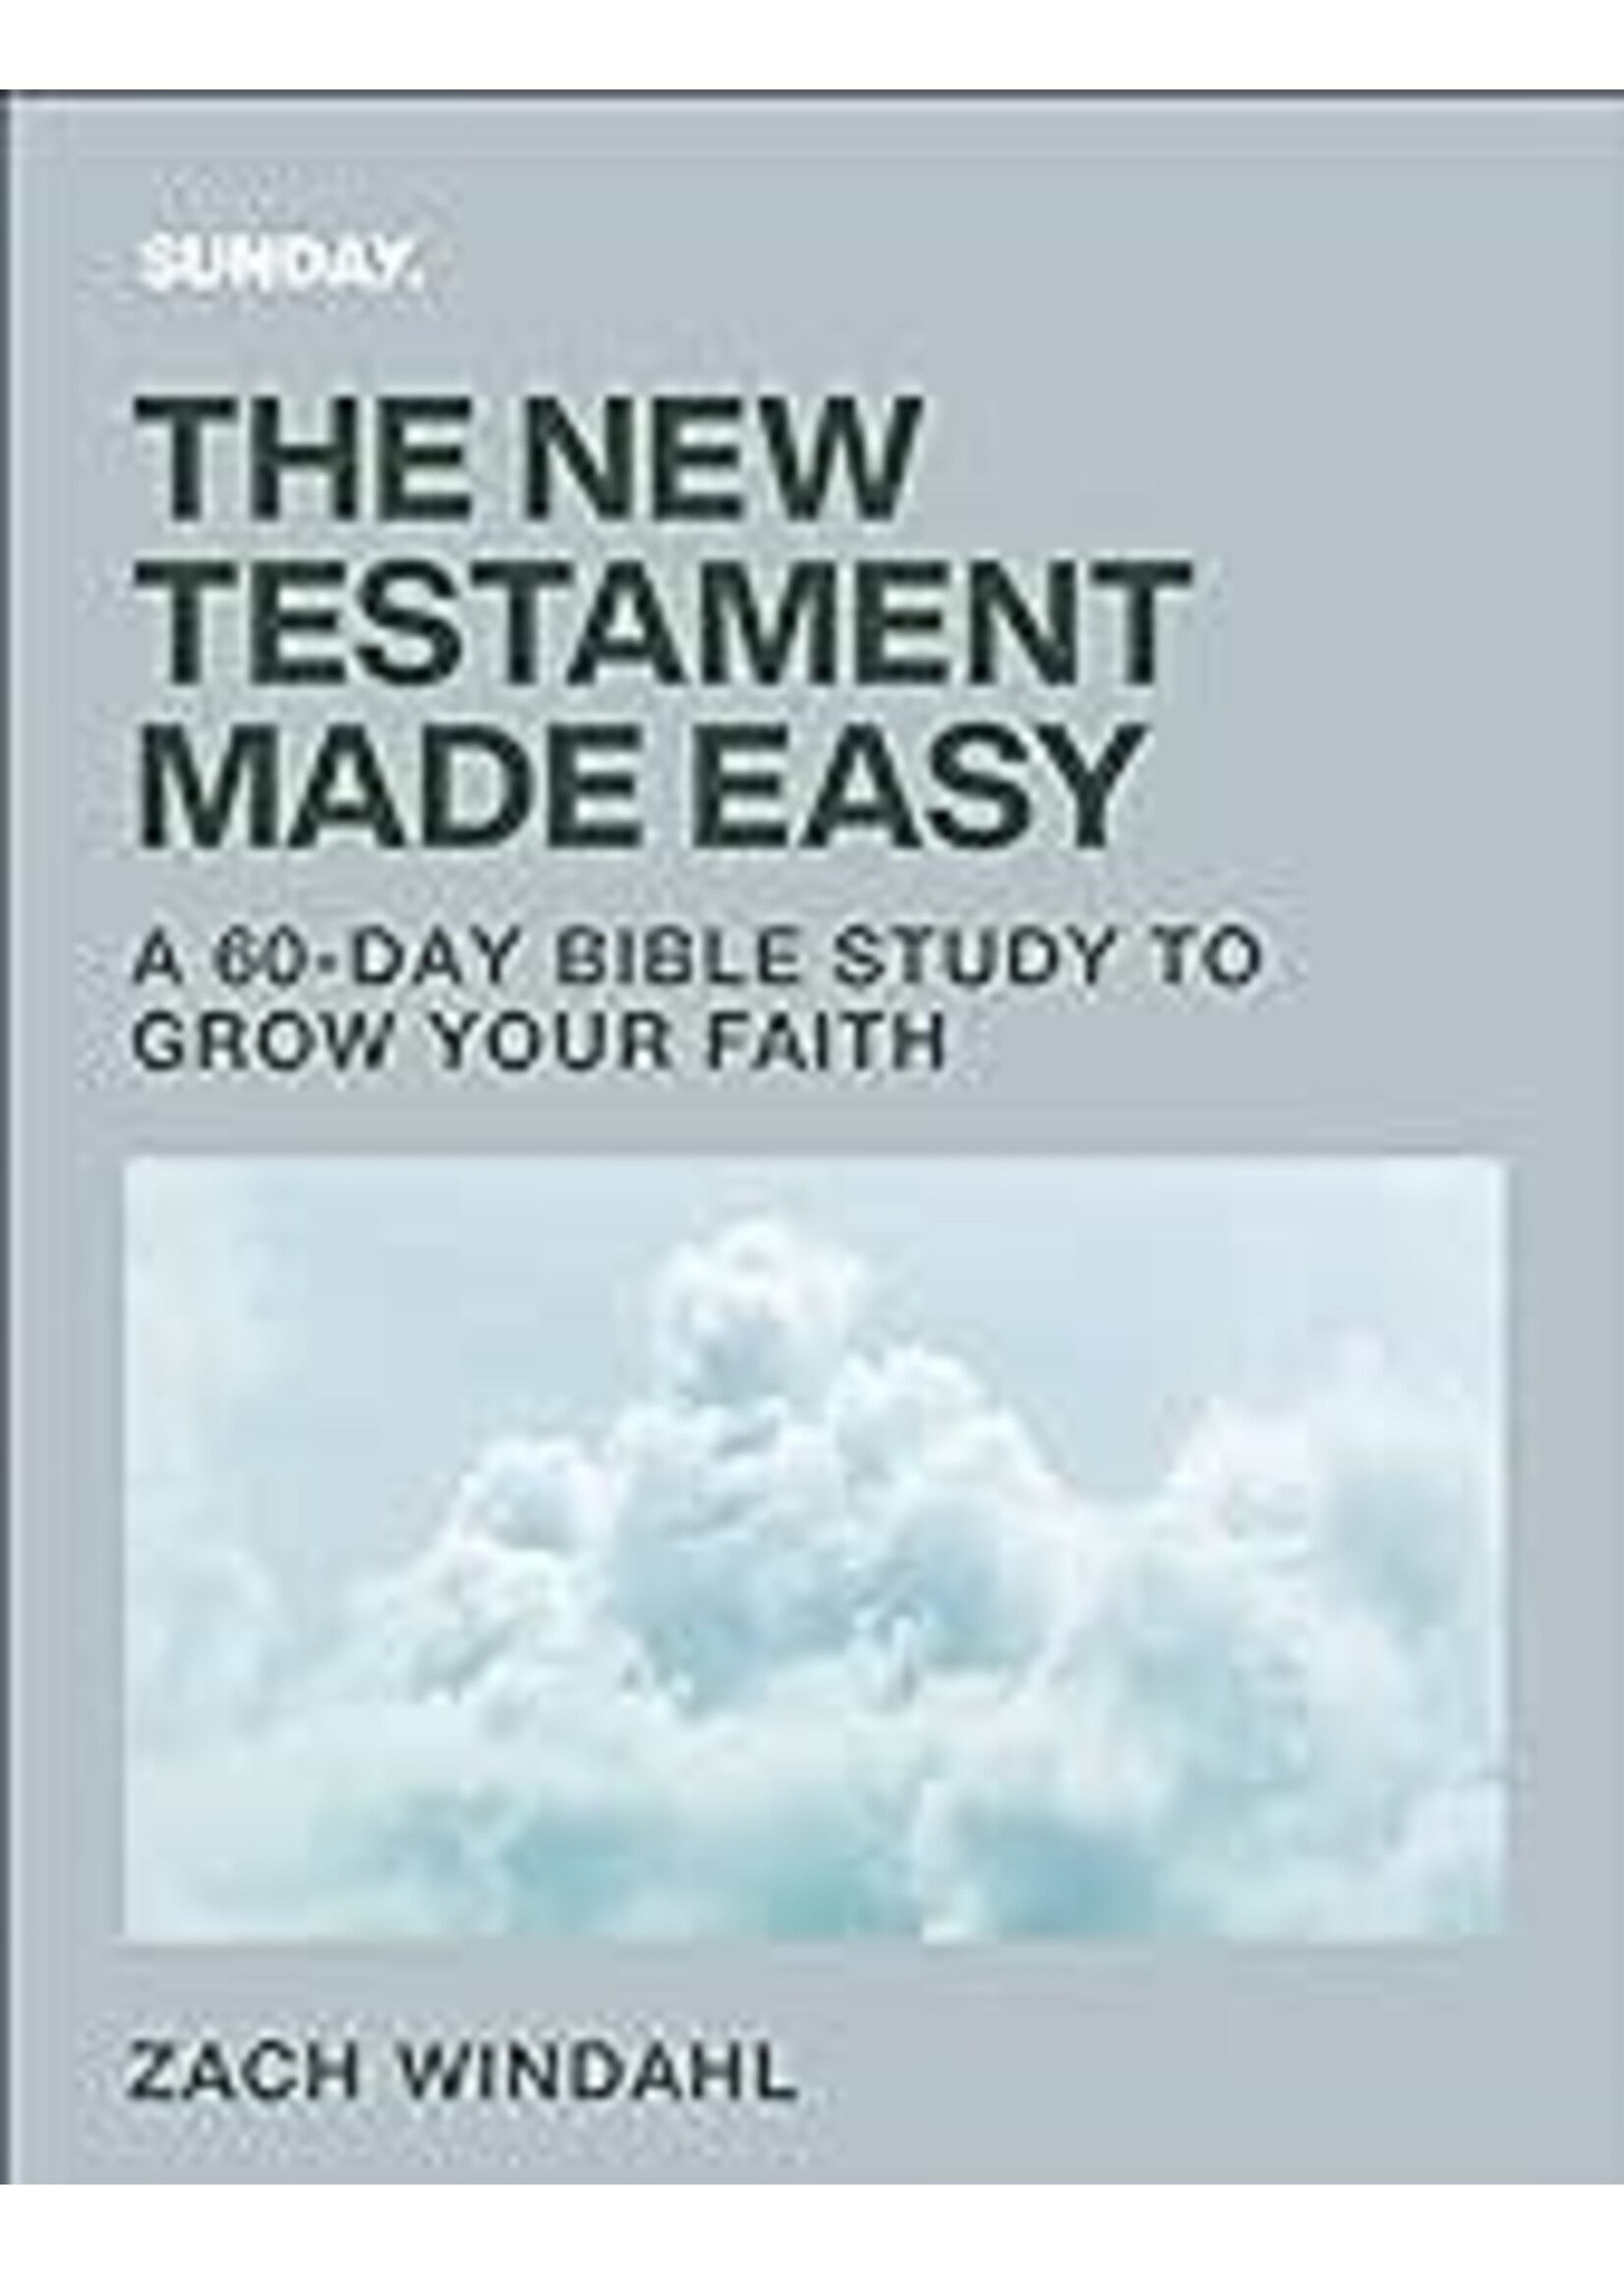 The New Testament Made Easy